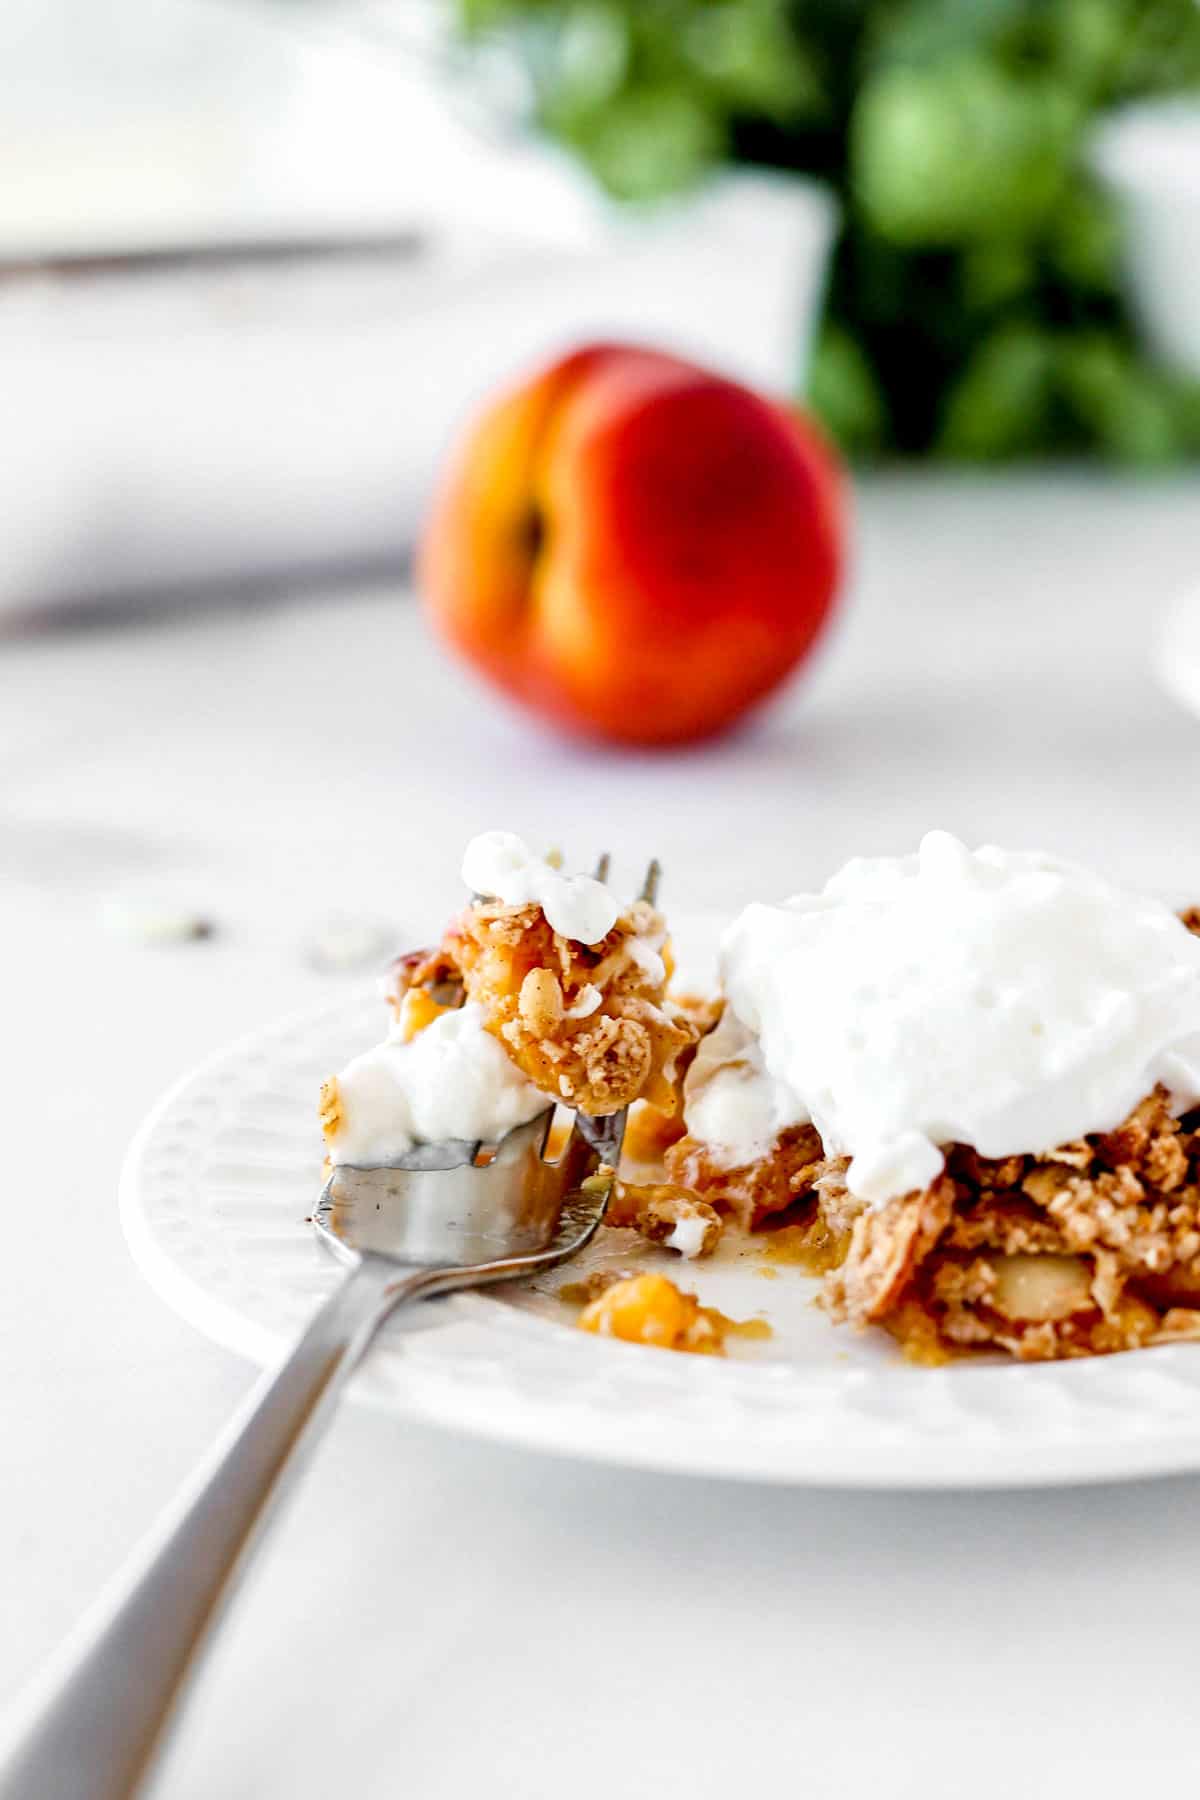 A fork with some low sugar peach crisp on it.